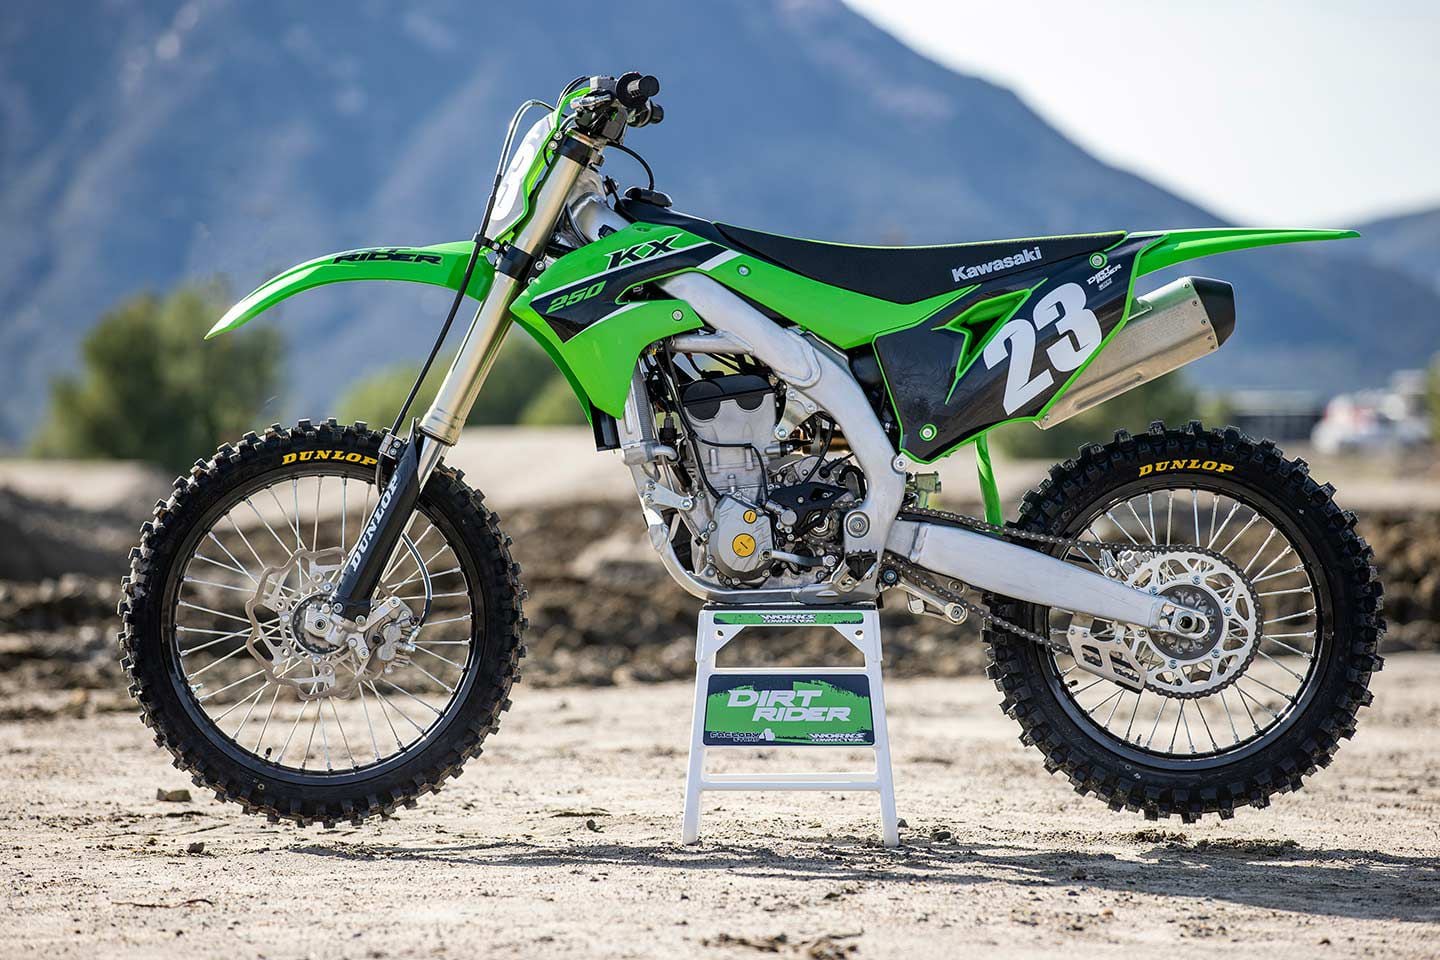 Hitting our automotive scales at 239 pounds wet, Team Green’s quarter-liter four-stroke motocrosser is heaviest in the segment.